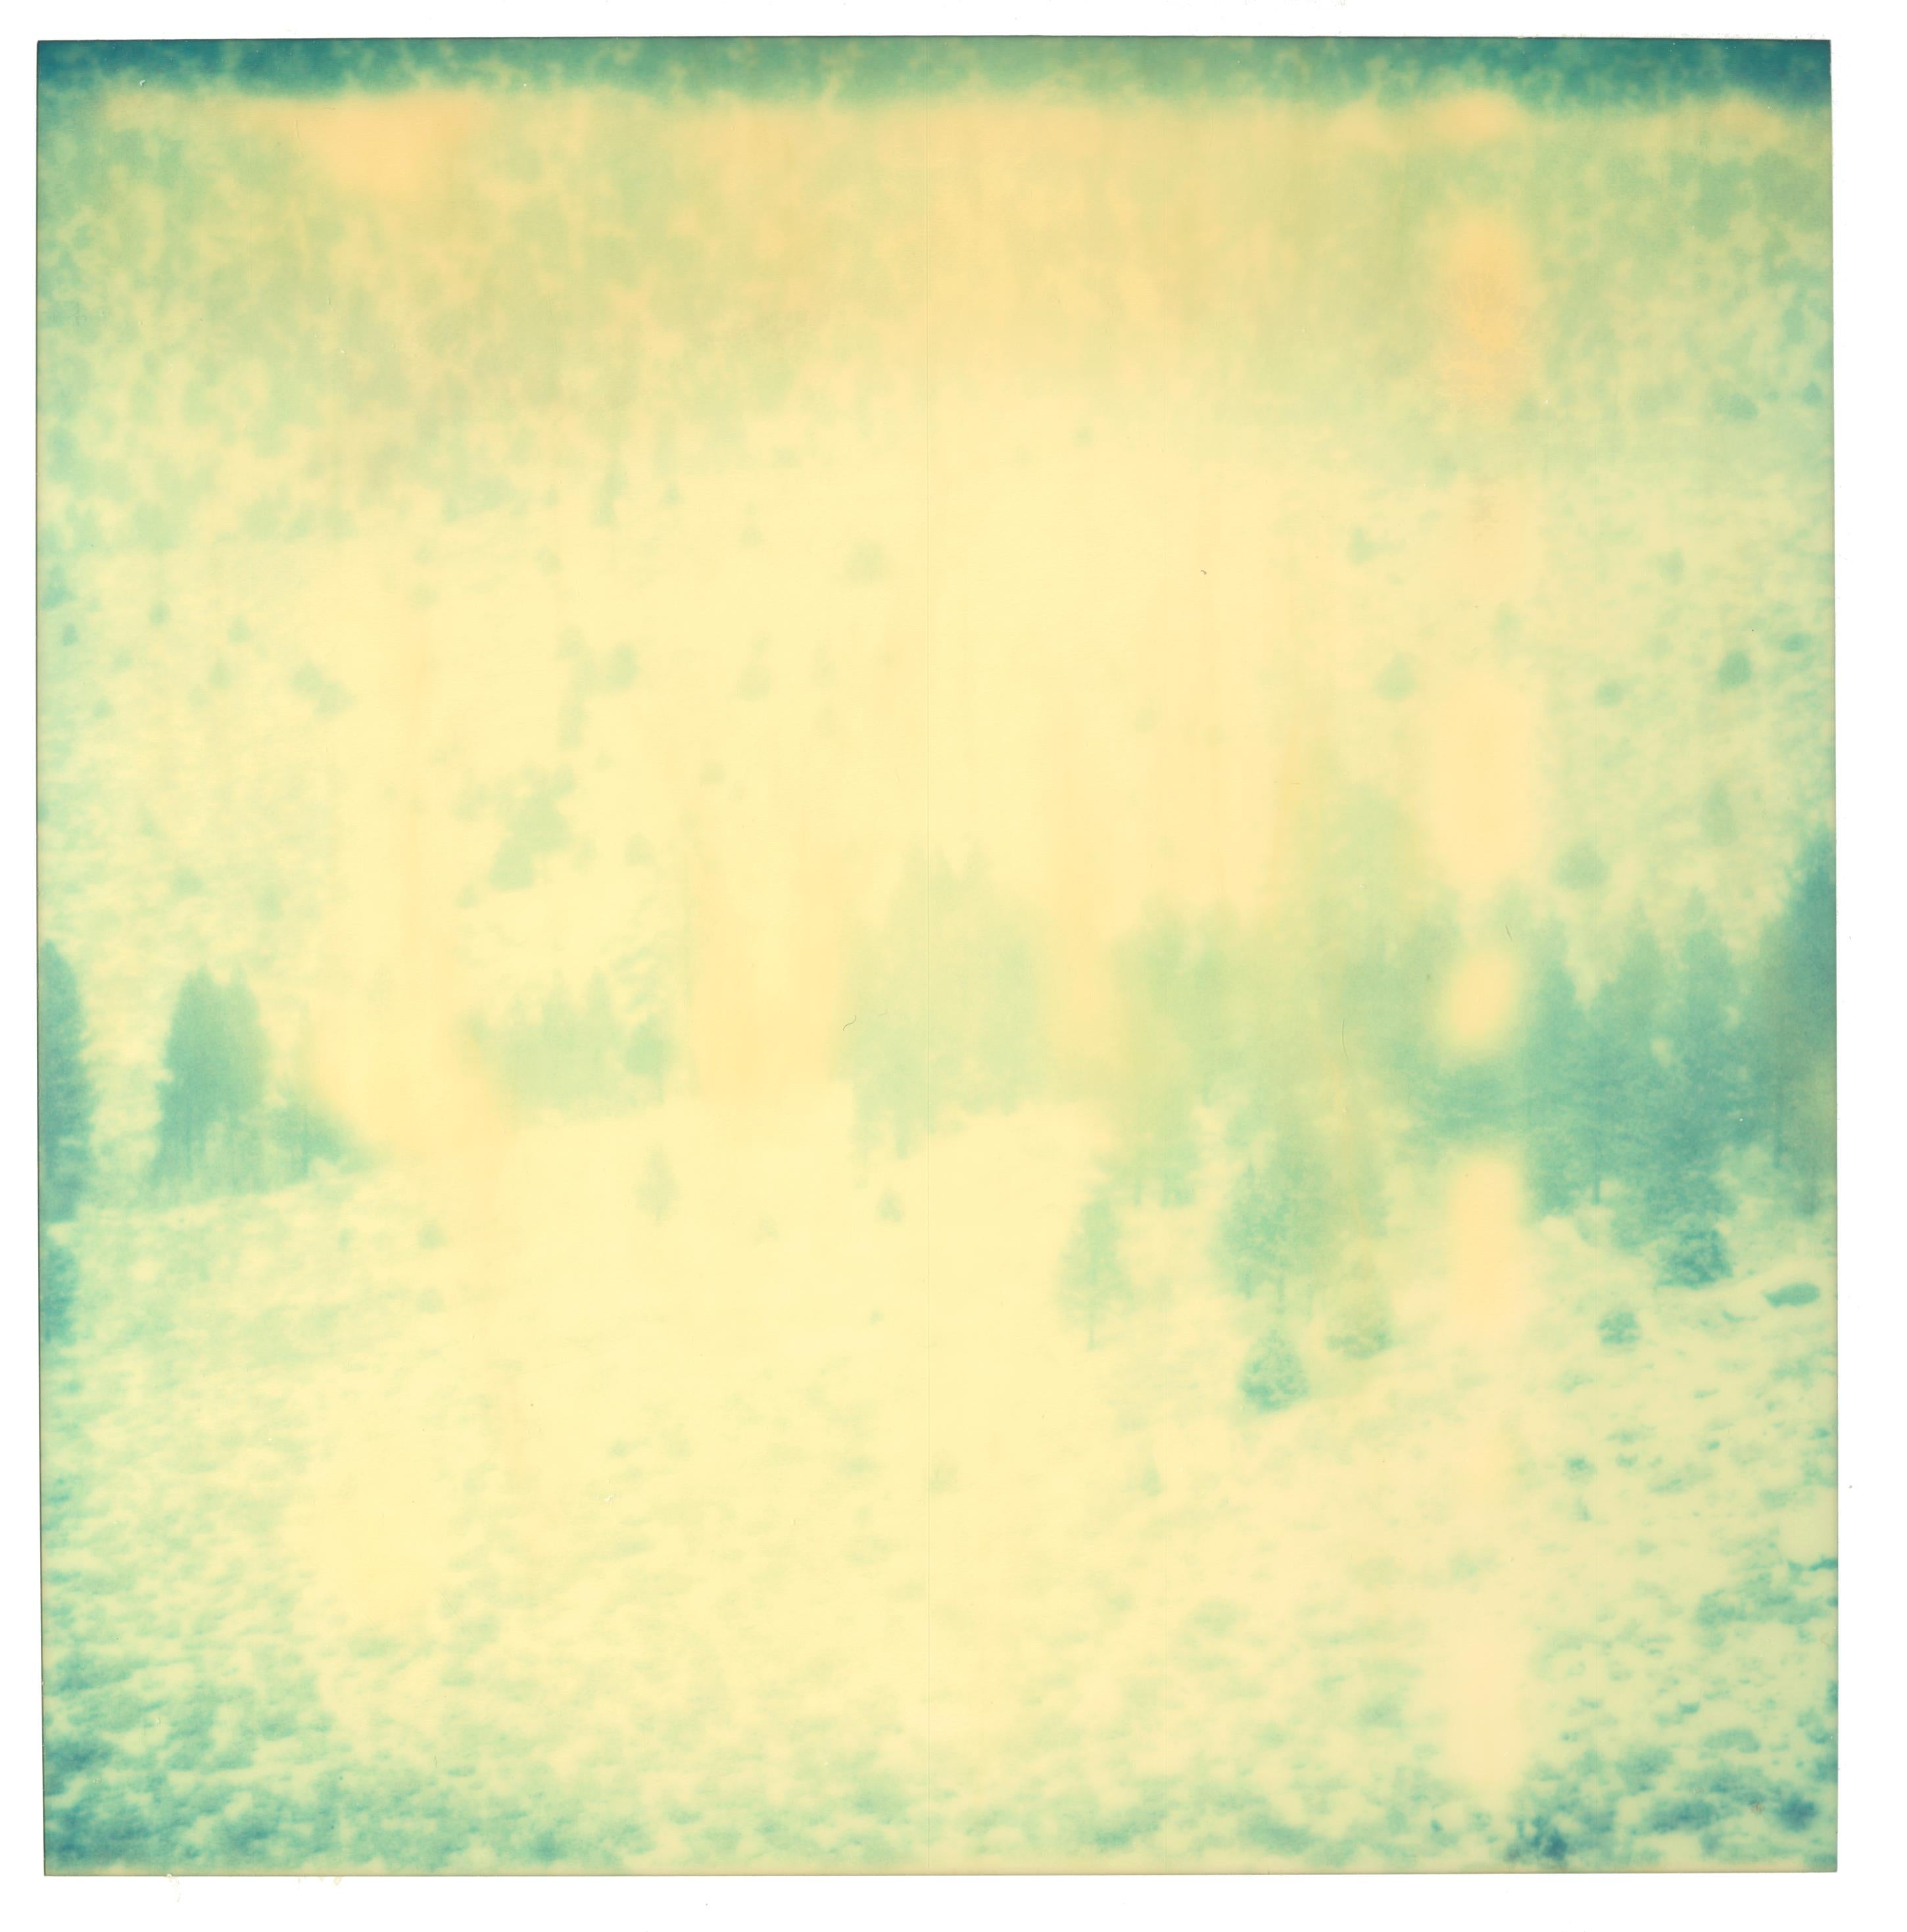 Memories of Green II, triptych, 

Edition 1/5 , 2003
each 58x56cm, installed with gaps 58x178cm, 
3 analog C-Prints, hand-printed by the artist on Fuji Crystal Archive Paper,
based on the 3 expired Polaroid, 
Artist inventory Number 1144.01.